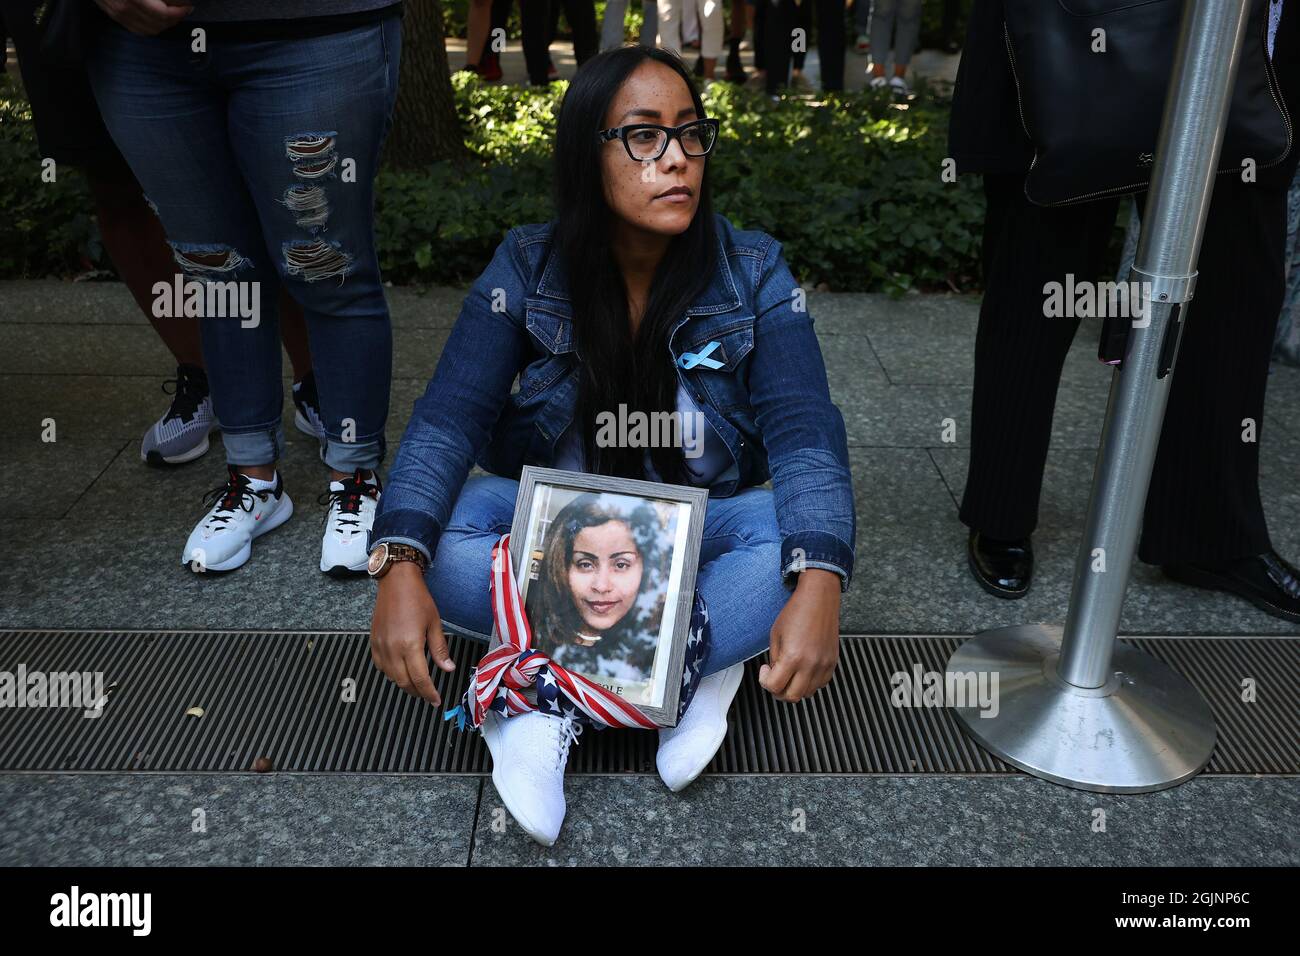 New York, USA. 11th Sep, 2021. NEW YORK, NEW YORK - SEPTEMBER 11: A family member of Jennie Nicole Gonzalez attends the annual 9/11 Commemoration Ceremony at the National 9/11 Memorial and Museum on September 11, 2021 in New York City. During the ceremony six moments of silence were held, marking when each of the World Trade Center towers was struck and fell and the times corresponding to the attack on the Pentagon and the crash of Flight 93. The nation is marking the 20th anniversary of the terror attacks of September 11, 2001, when the terrorist group al-Qaeda flew hijacked airplanes into th Stock Photo